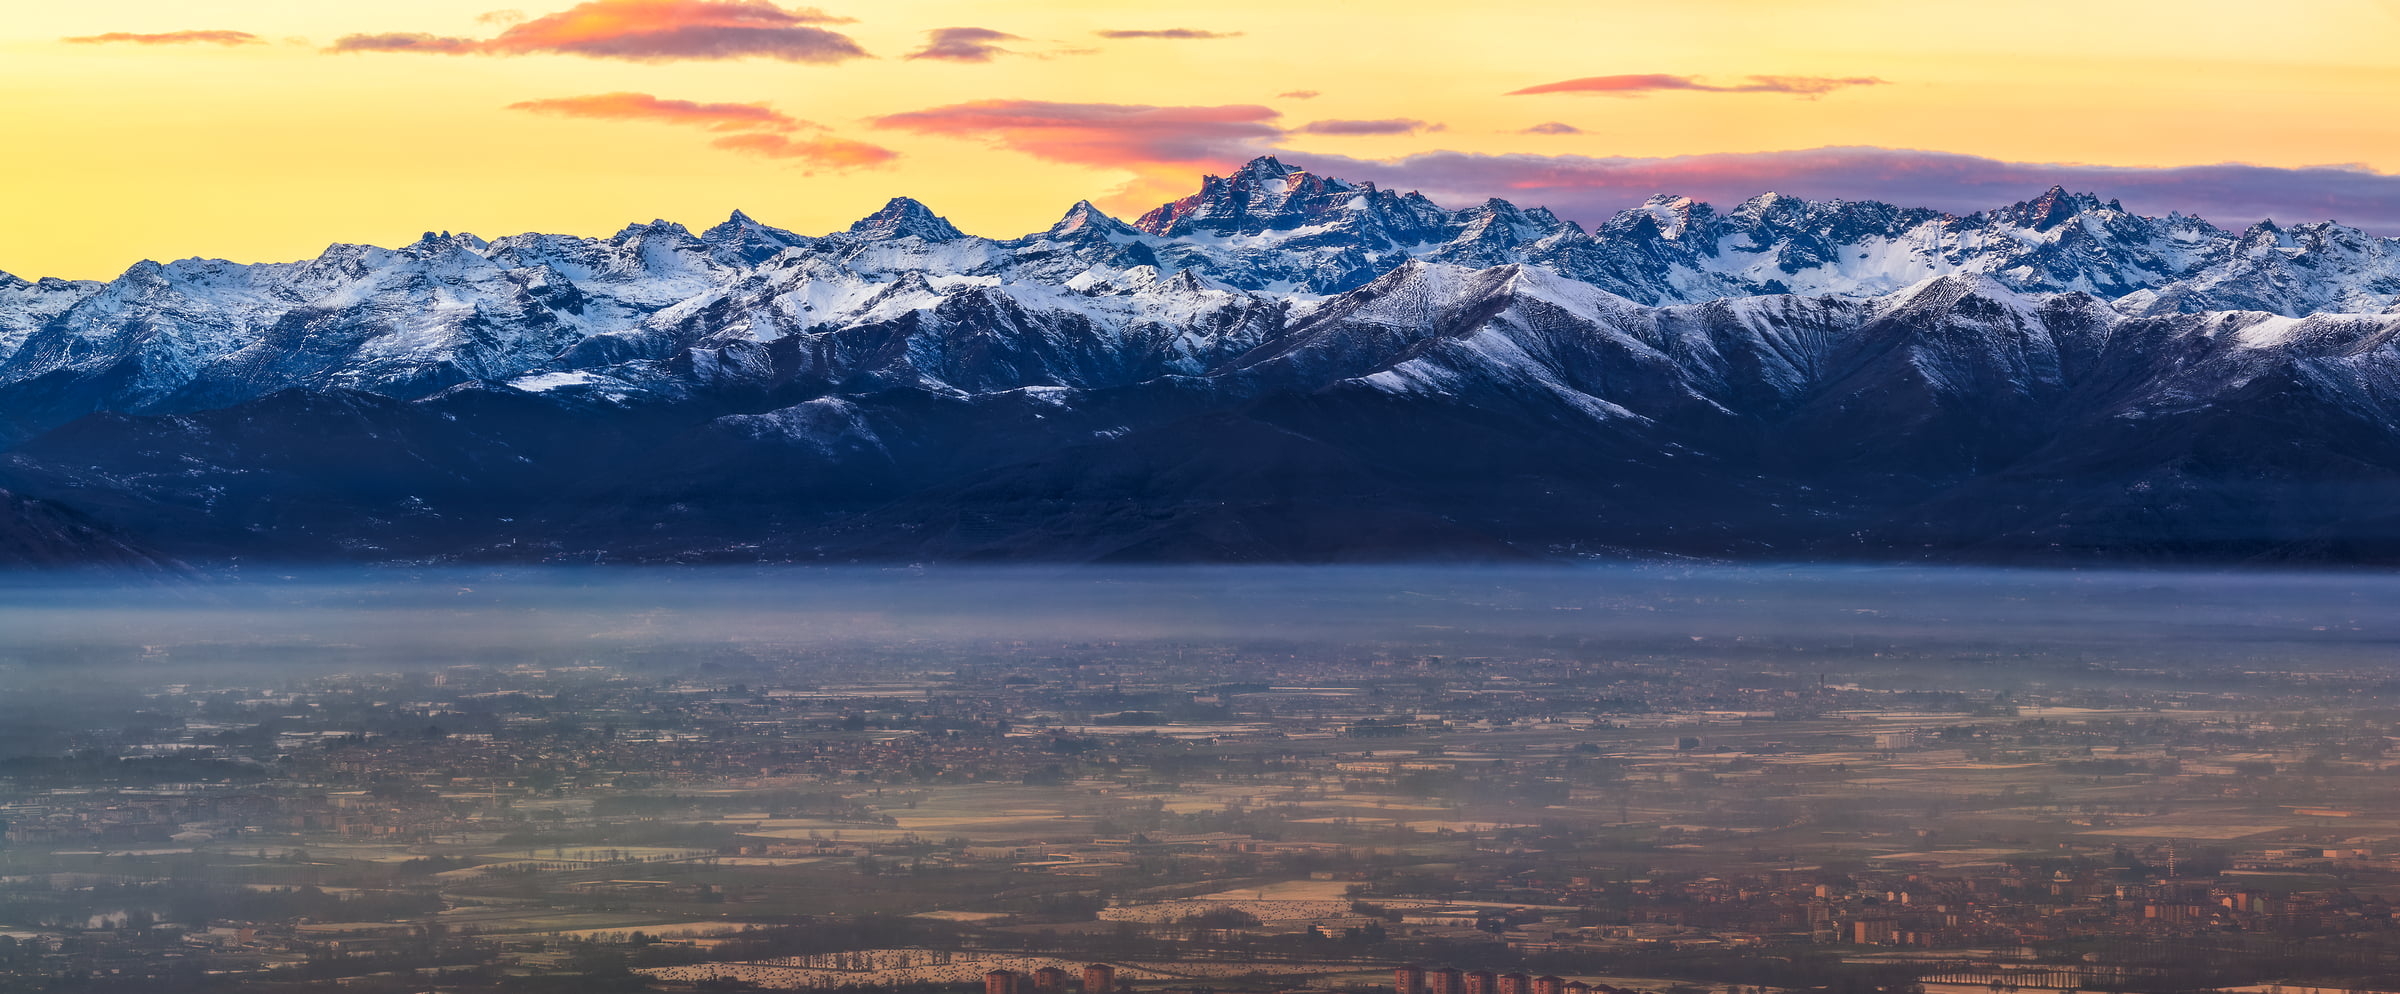 220 megapixels! A very high resolution, large-format VAST photo print of the alps at sunset; landscape photograph created by Duilio Fiorille in Turin Superga Hill, Piedmont, Italy.